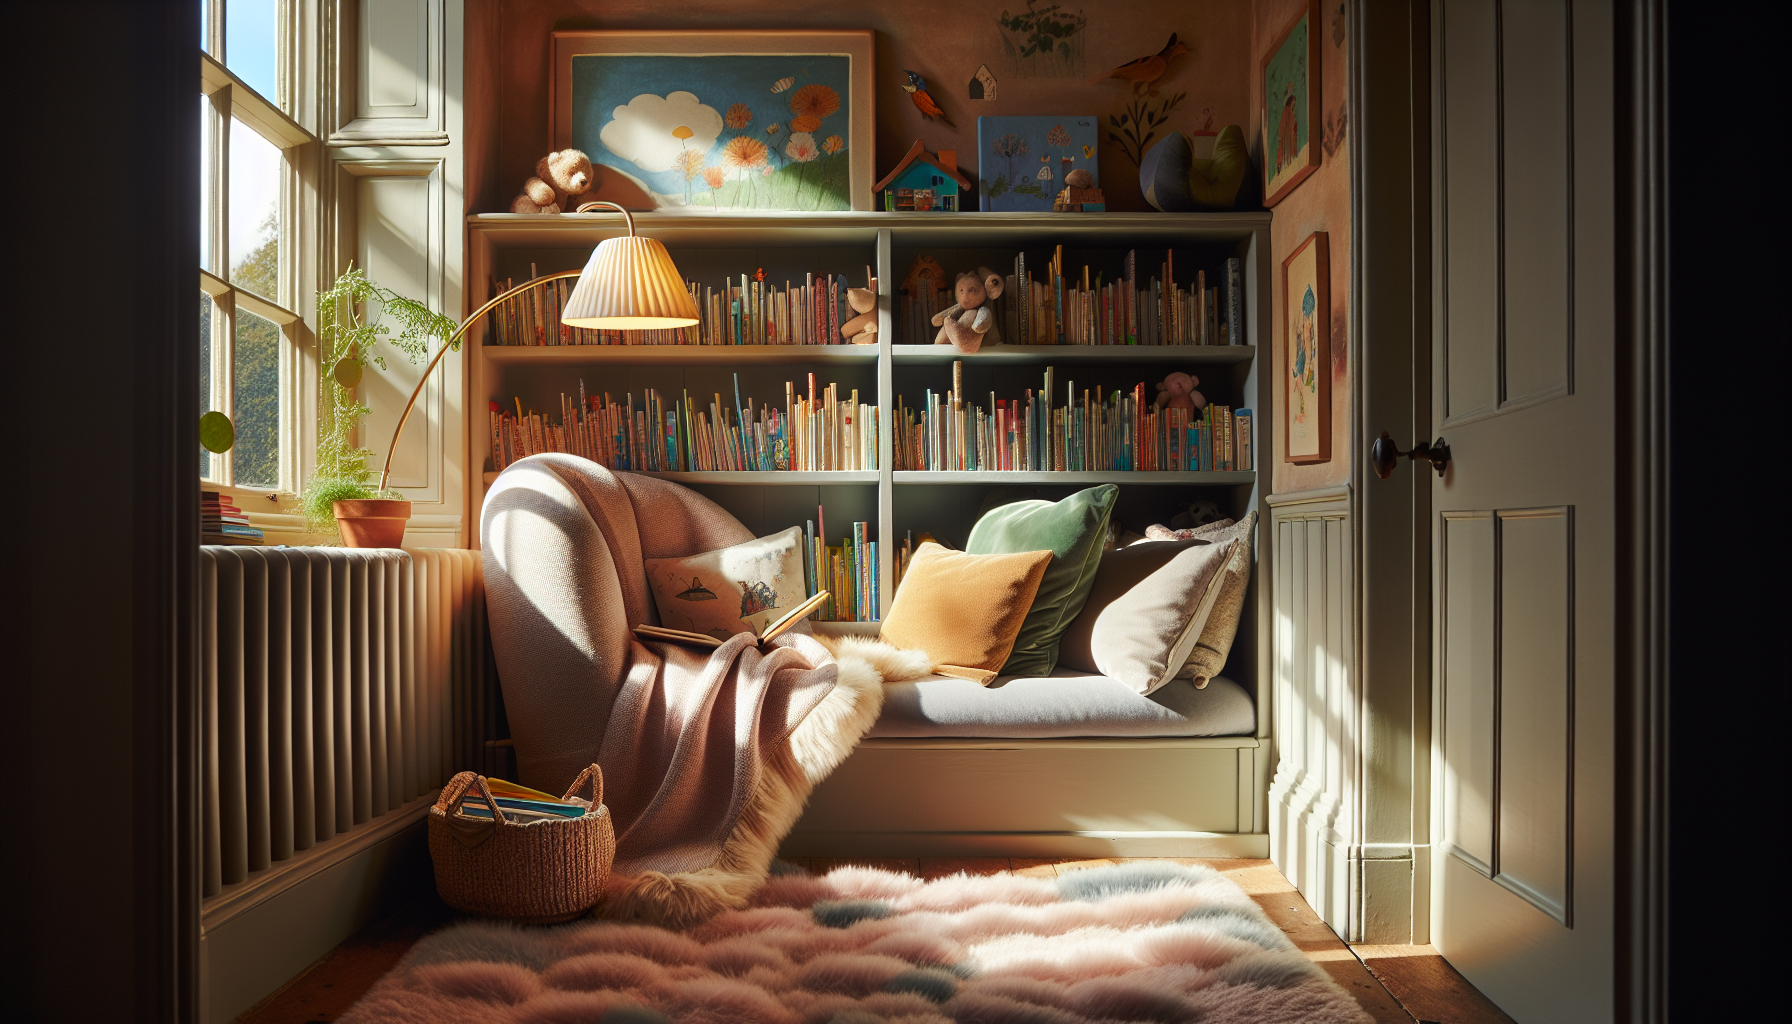 Cozy reading nook with accessible bookshelves